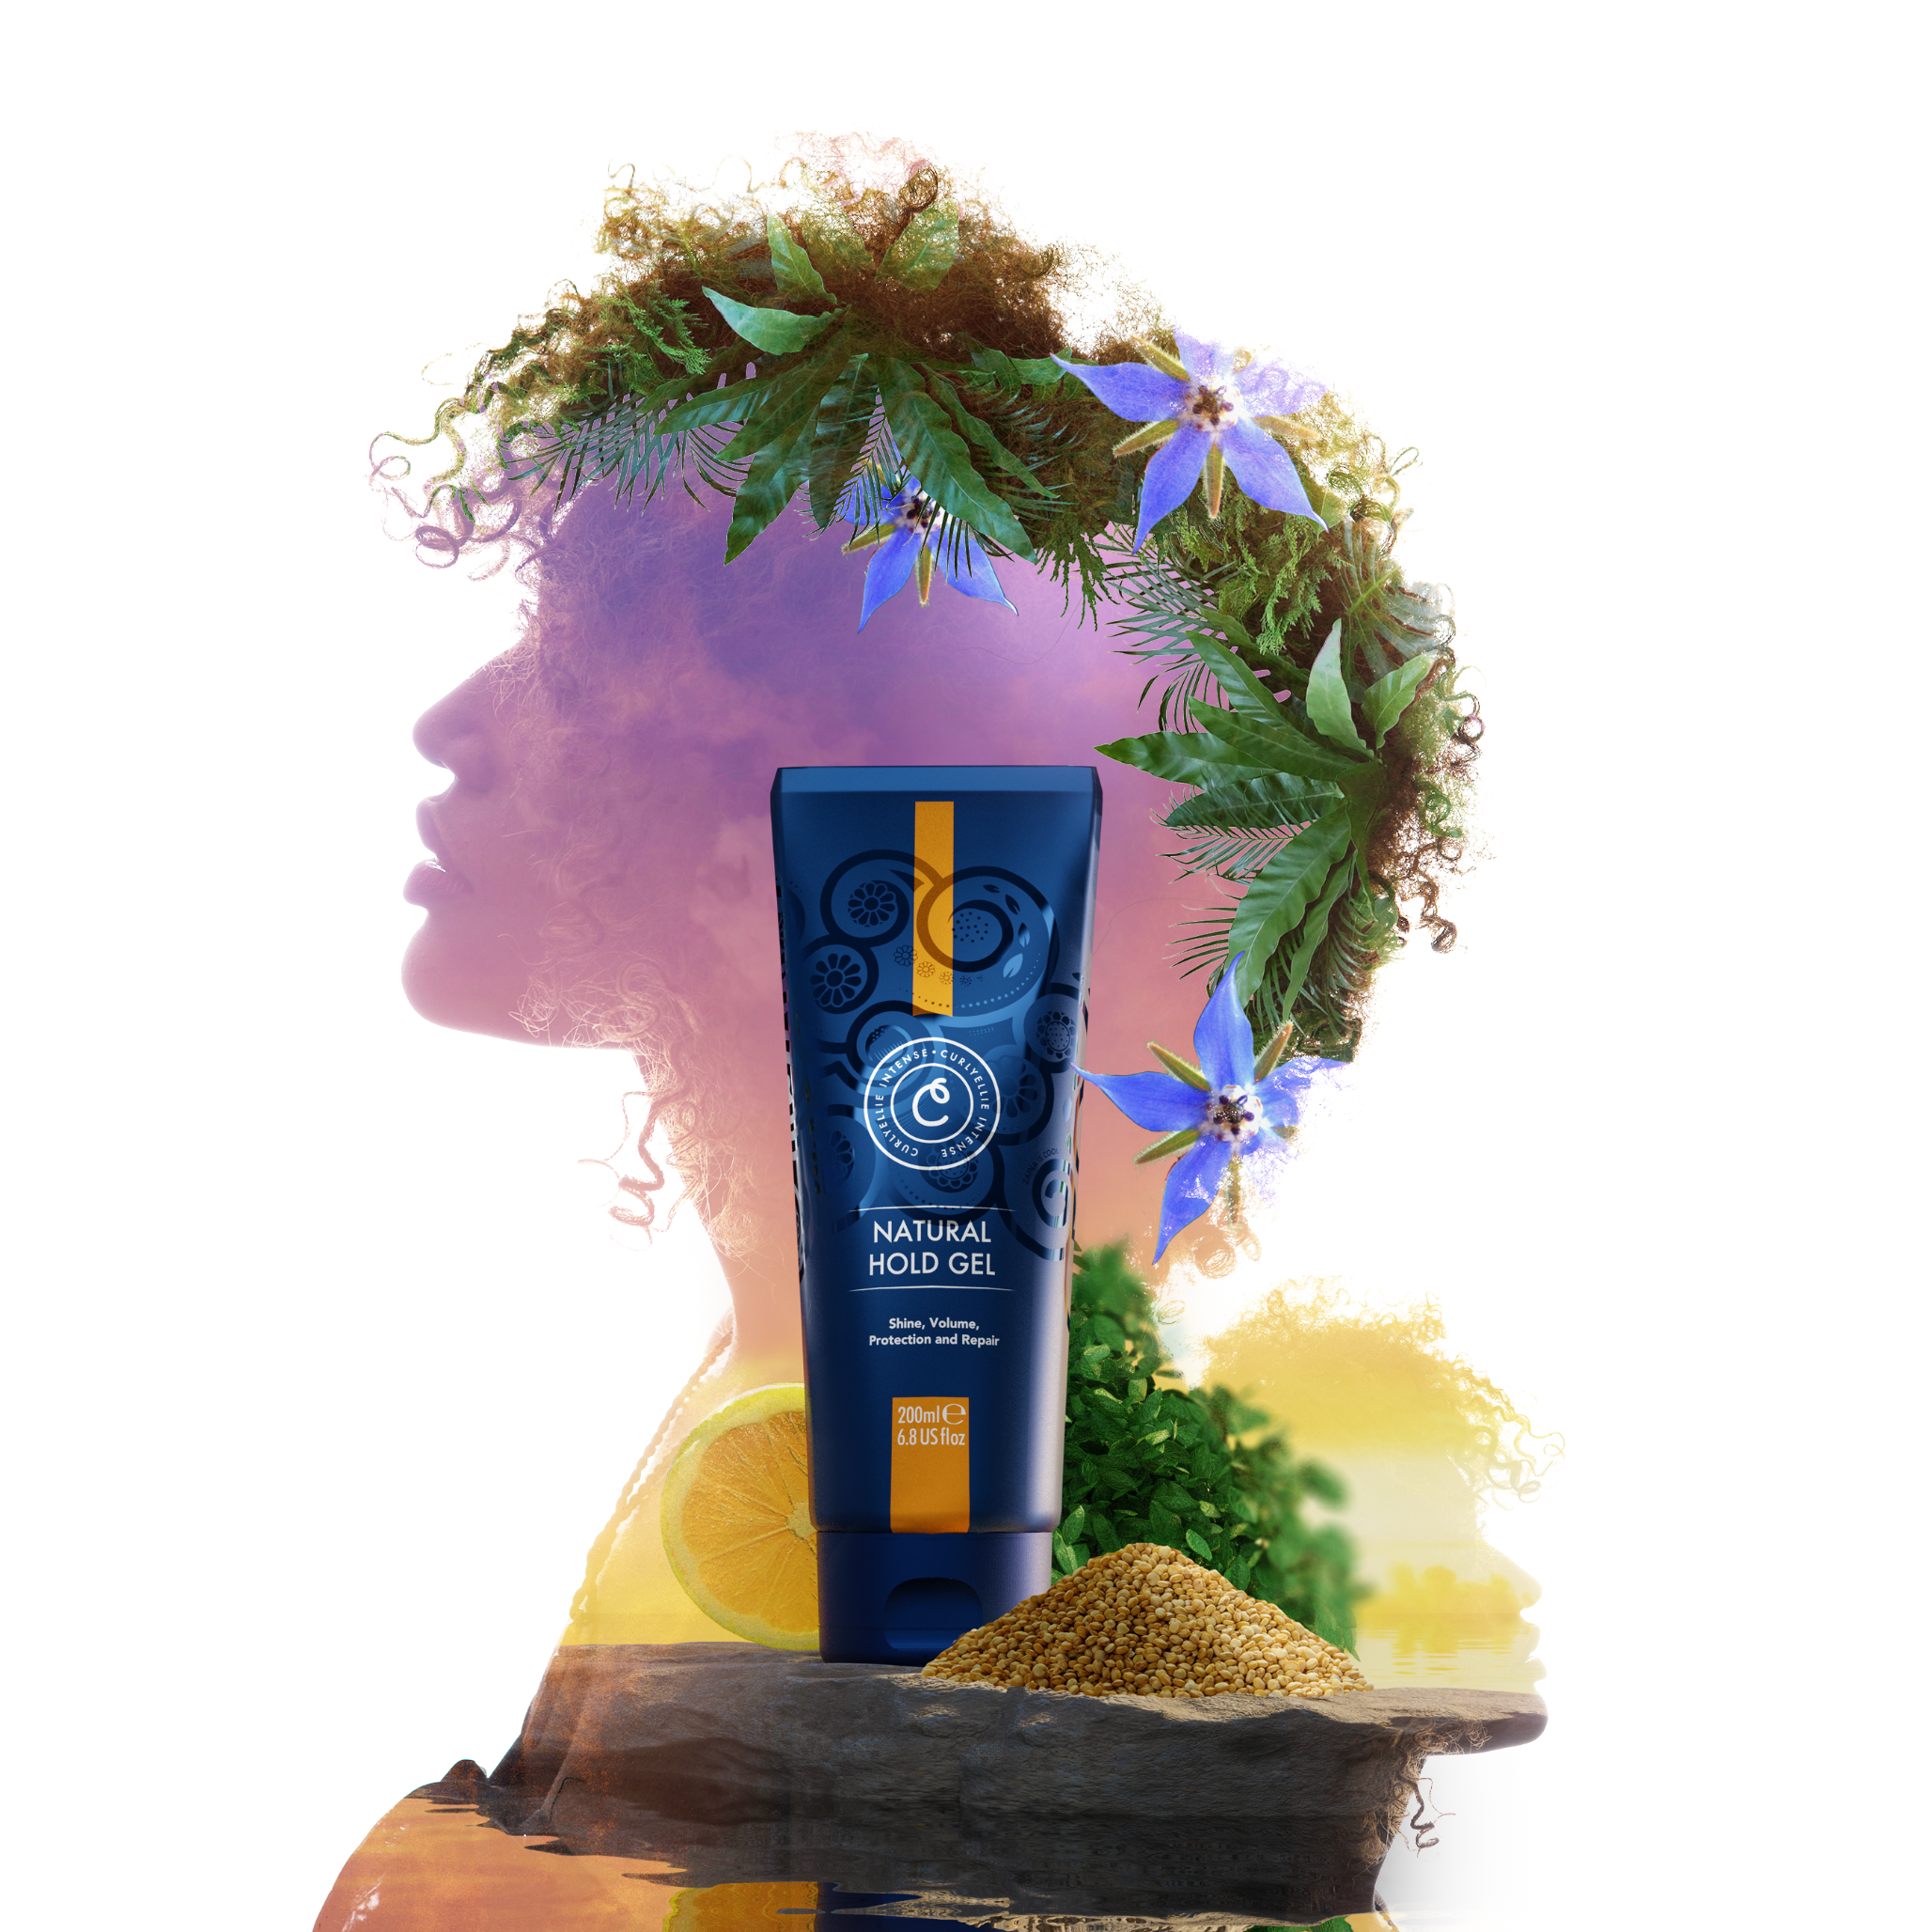 INTRODUCING... Our Brand New Natural Hold Gel